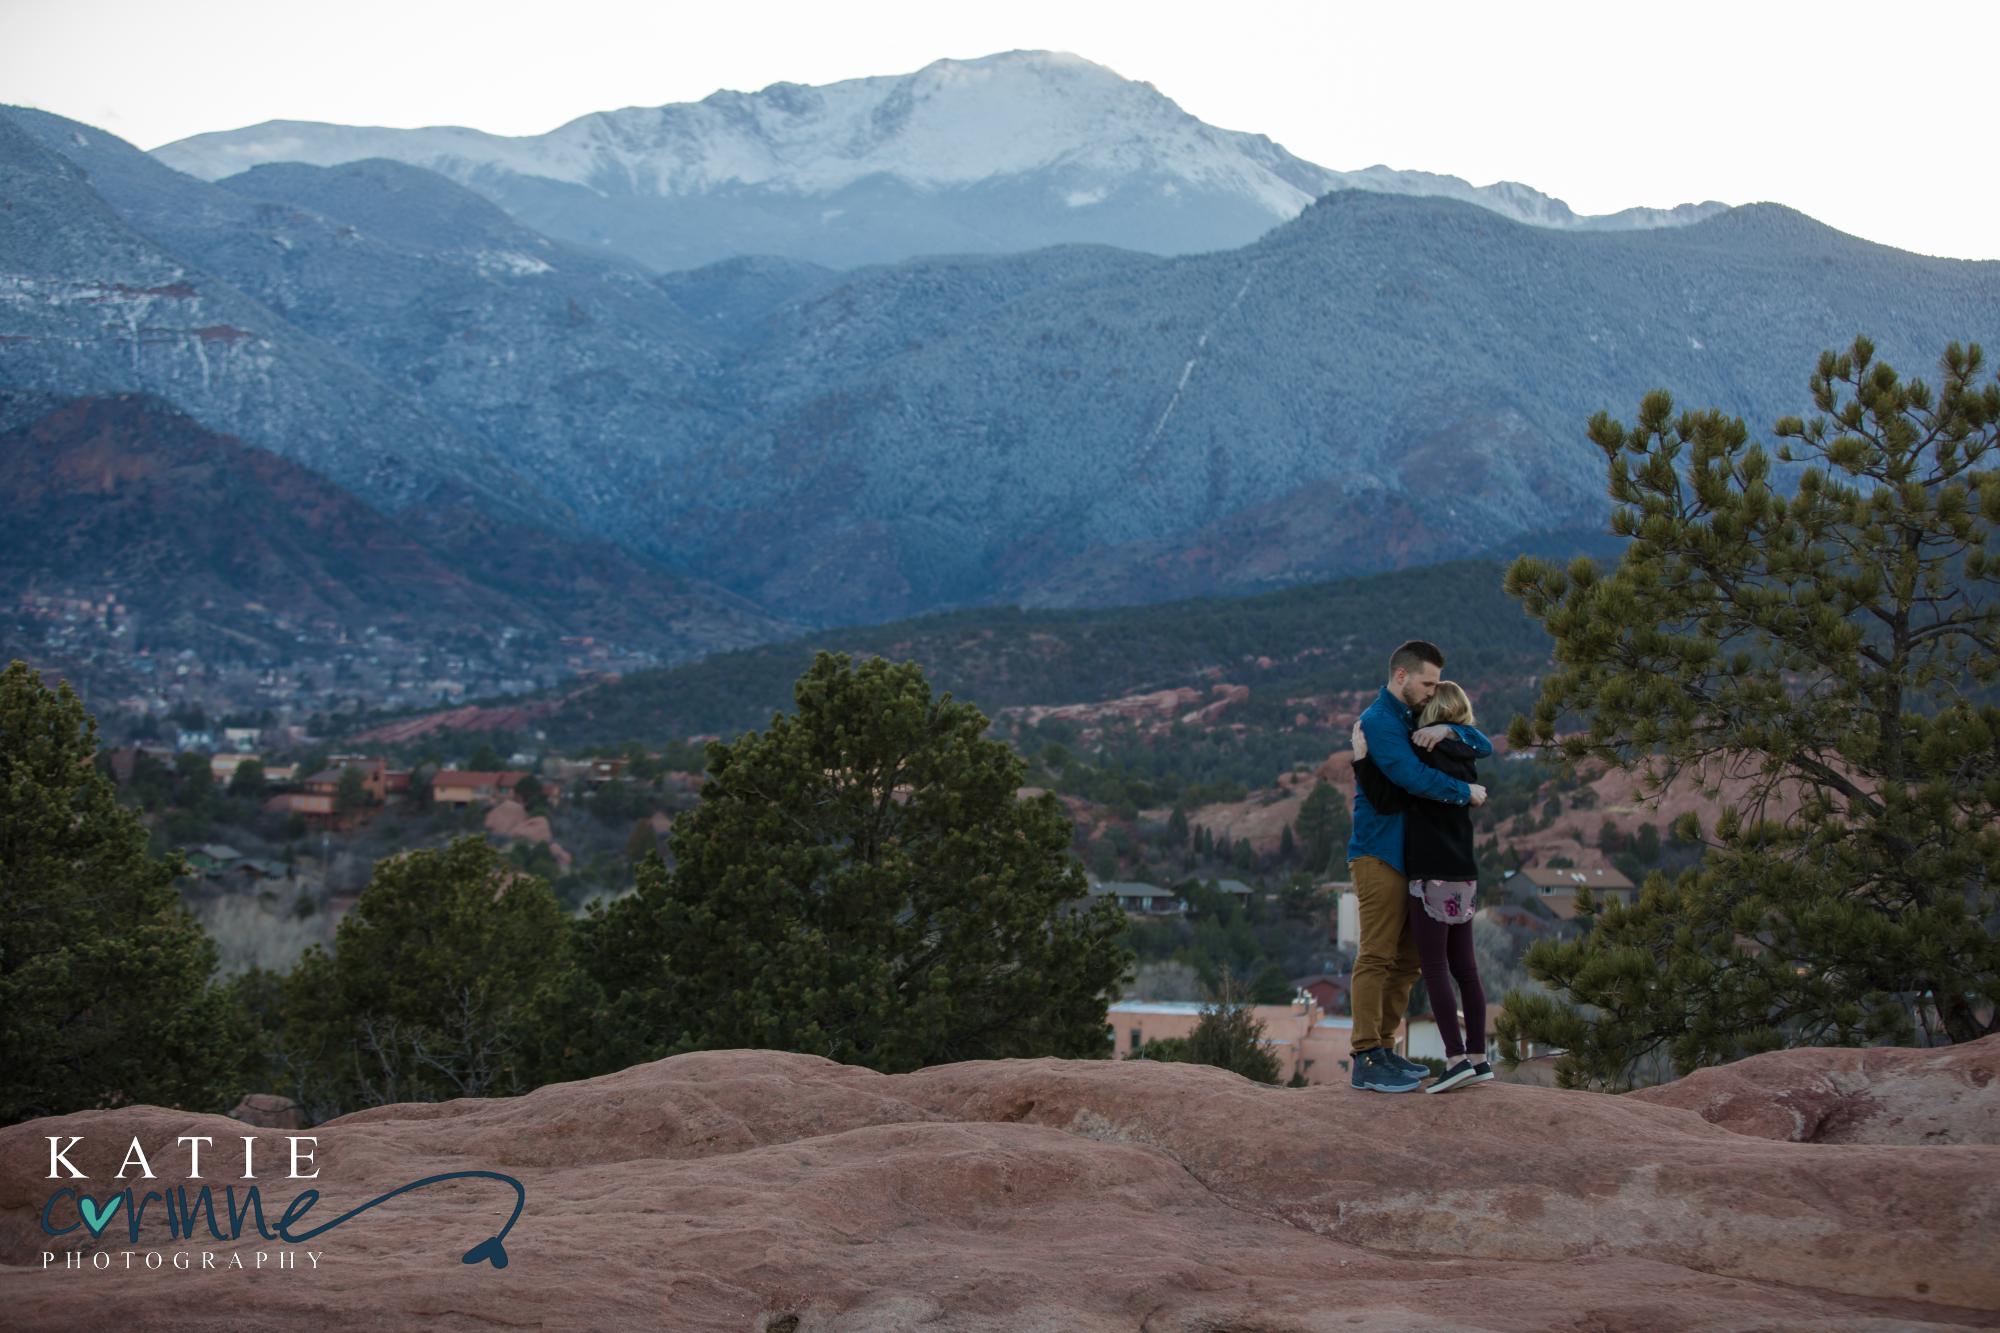 Colorado man proposes to girlfriend in surprise hiking proposal